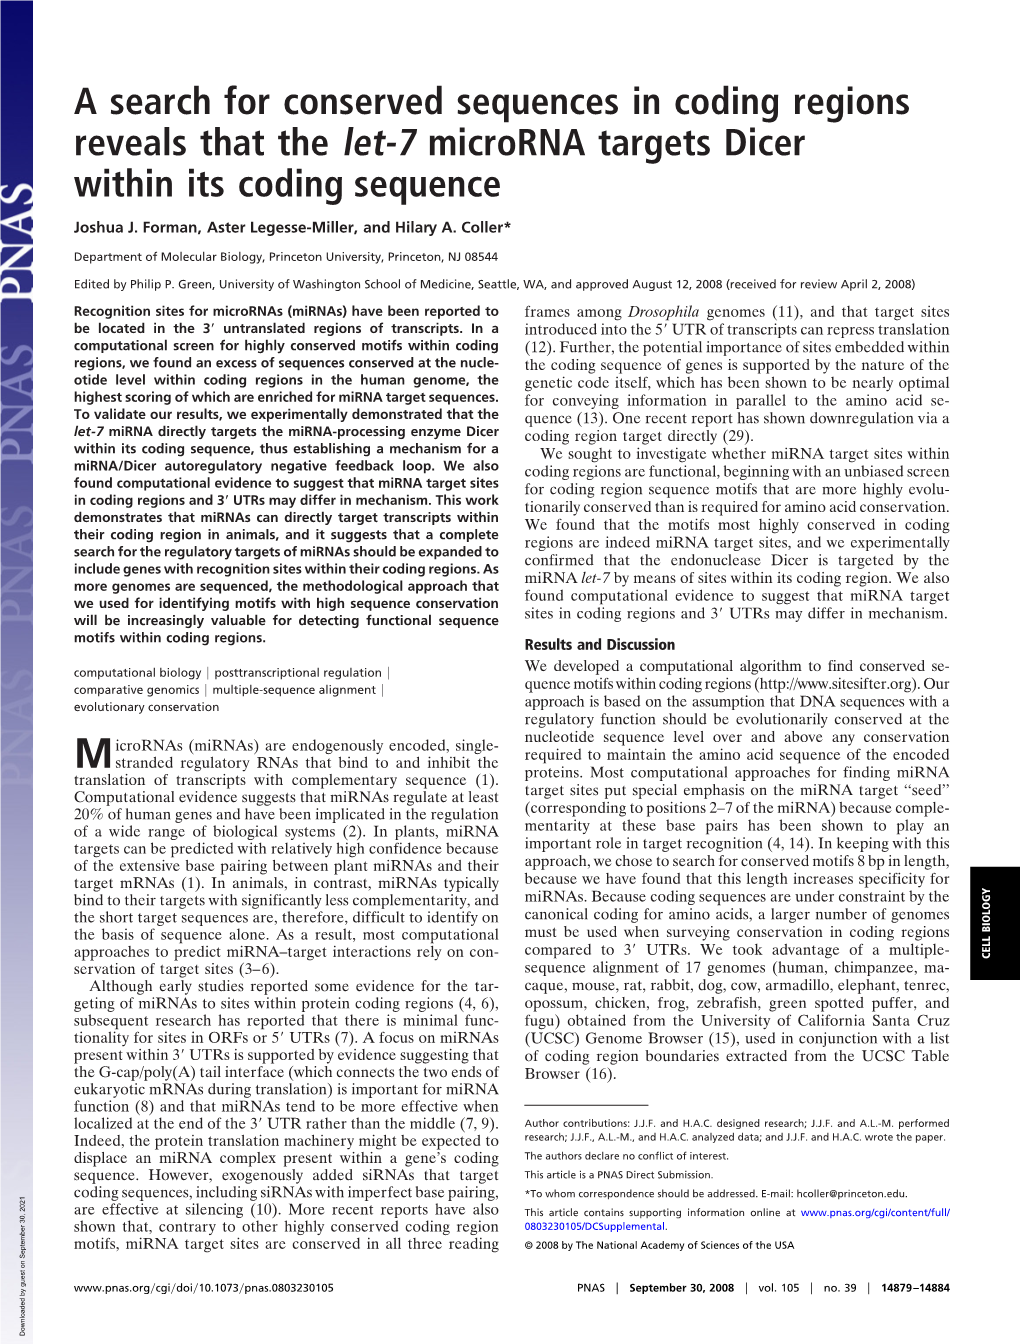 A Search for Conserved Sequences in Coding Regions Reveals That the Let-7 Microrna Targets Dicer Within Its Coding Sequence